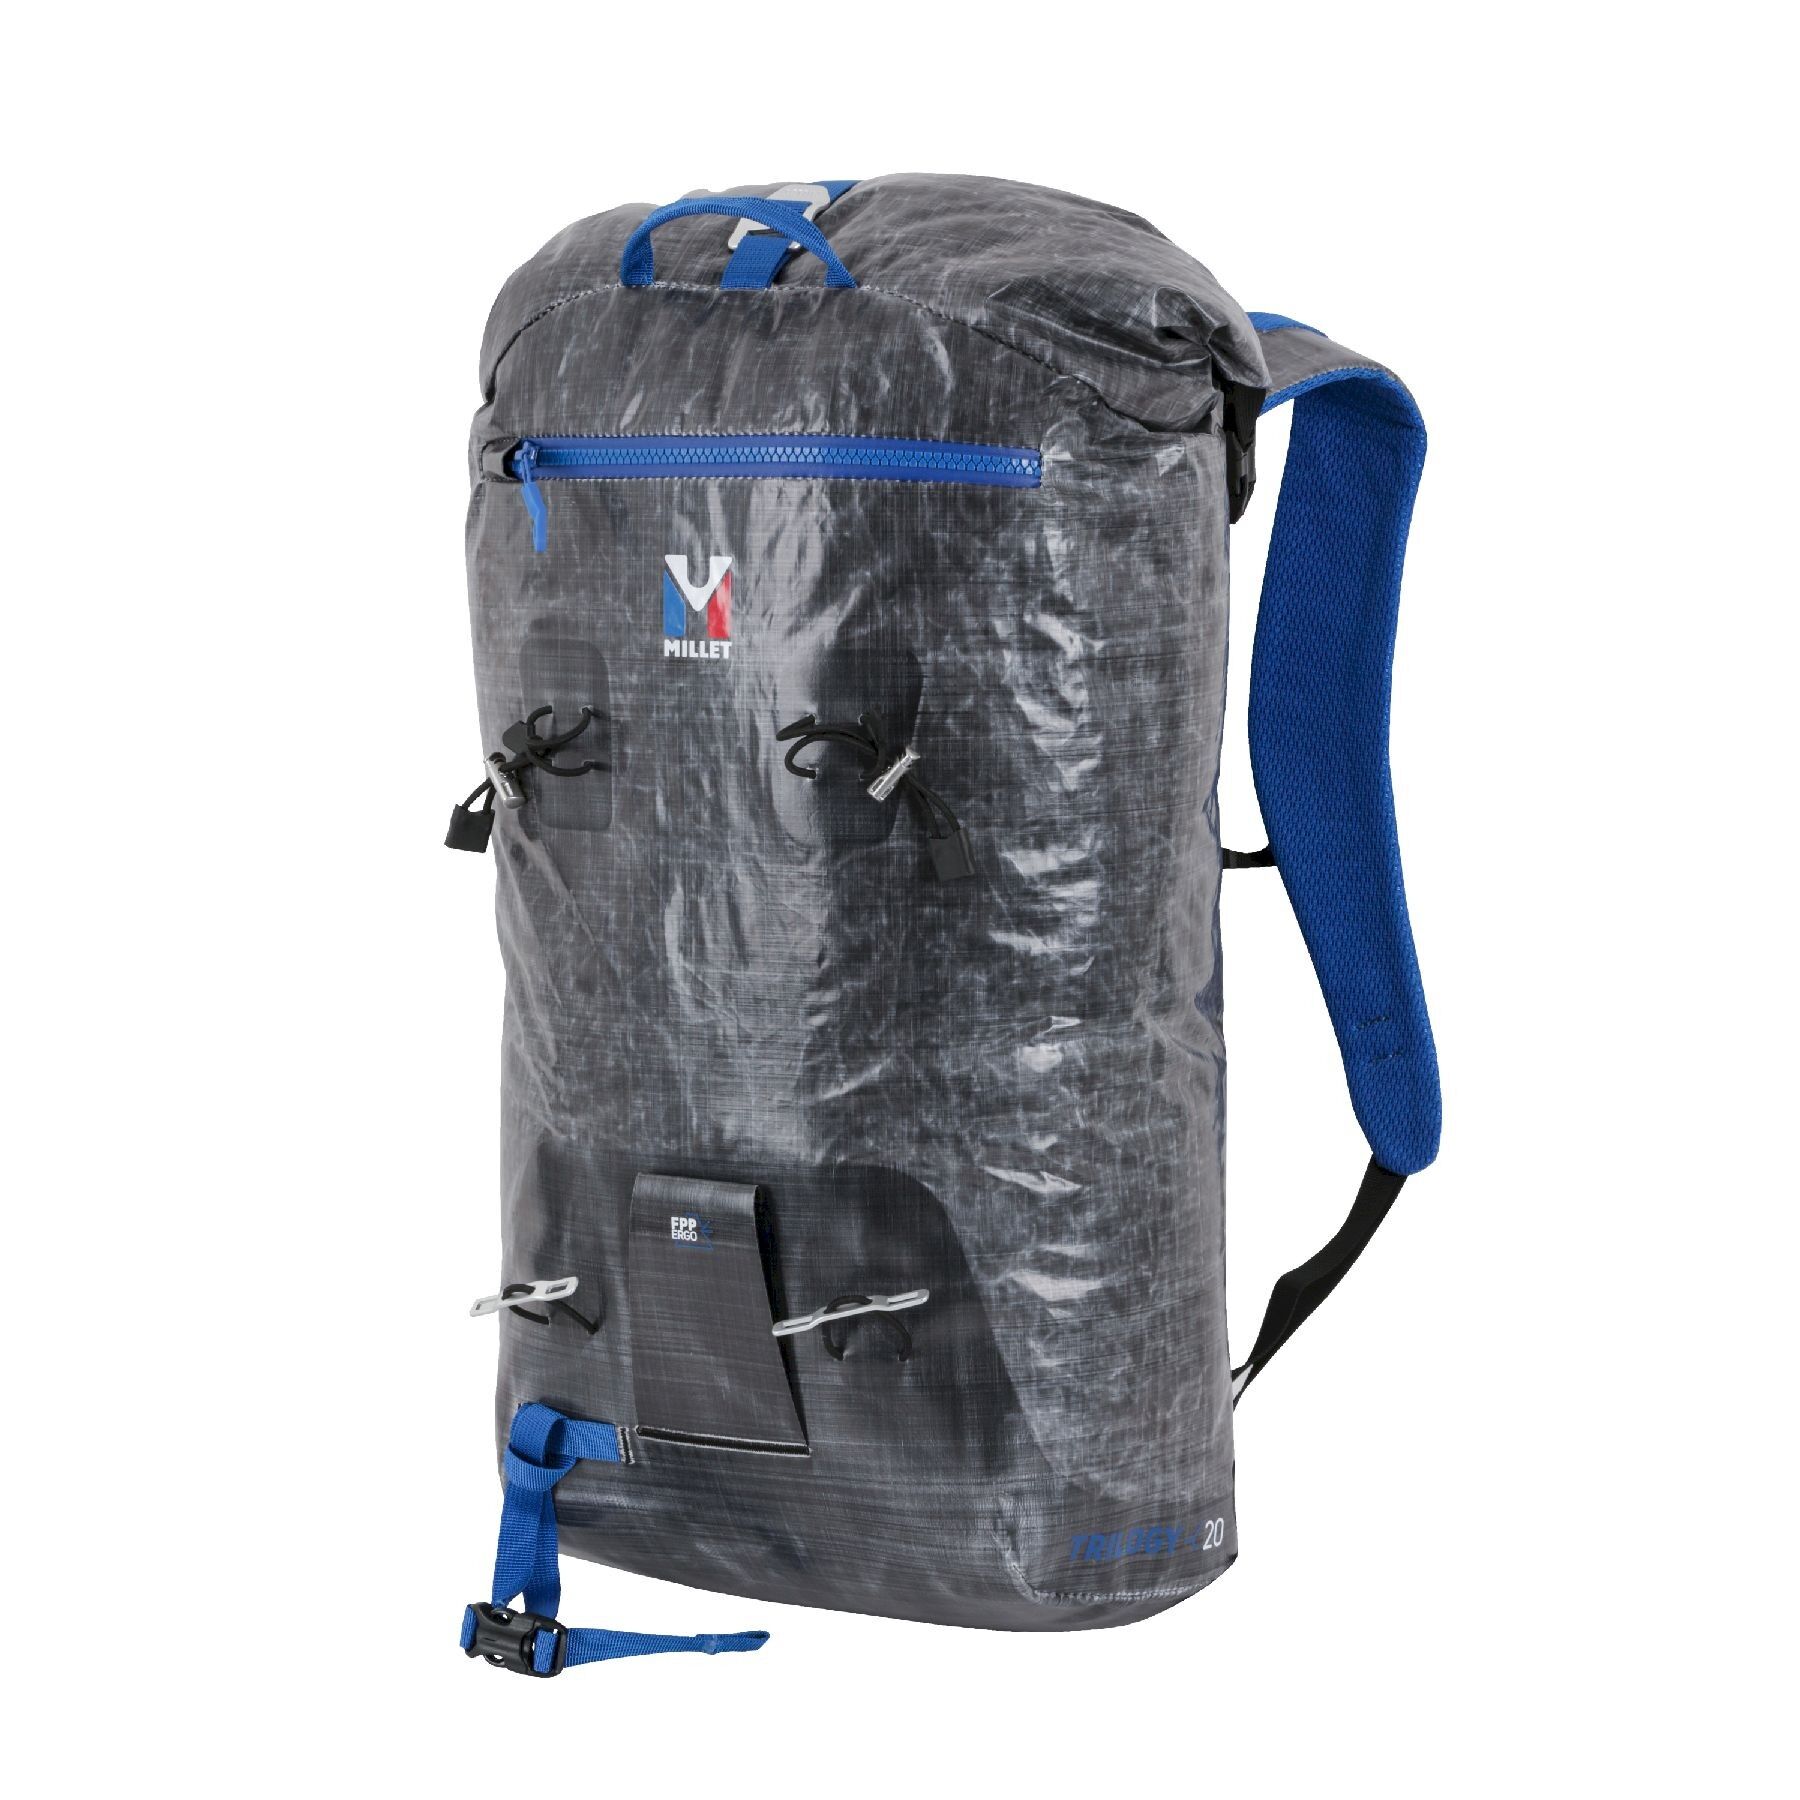 Millet Trilogy 20 - Mountaineering backpack